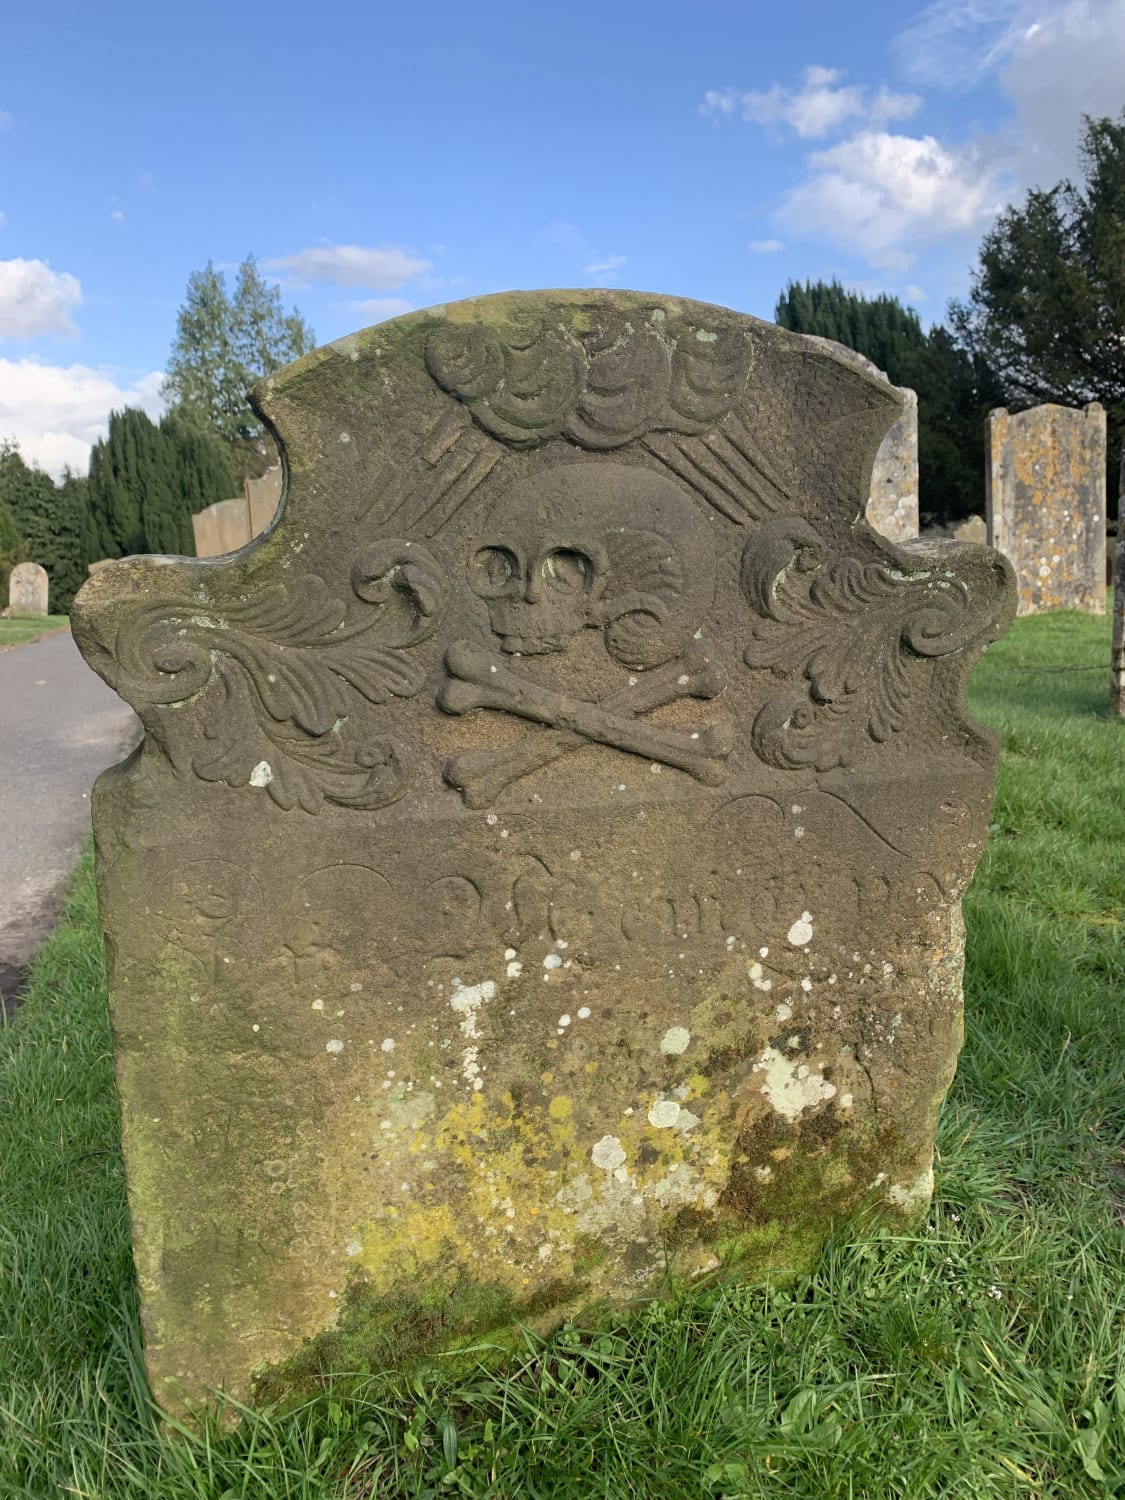 Pirates gravestone in Godstone, England. His name was John Edward Trenchman and he was part of Captain Morgan’s crew. Awesome!